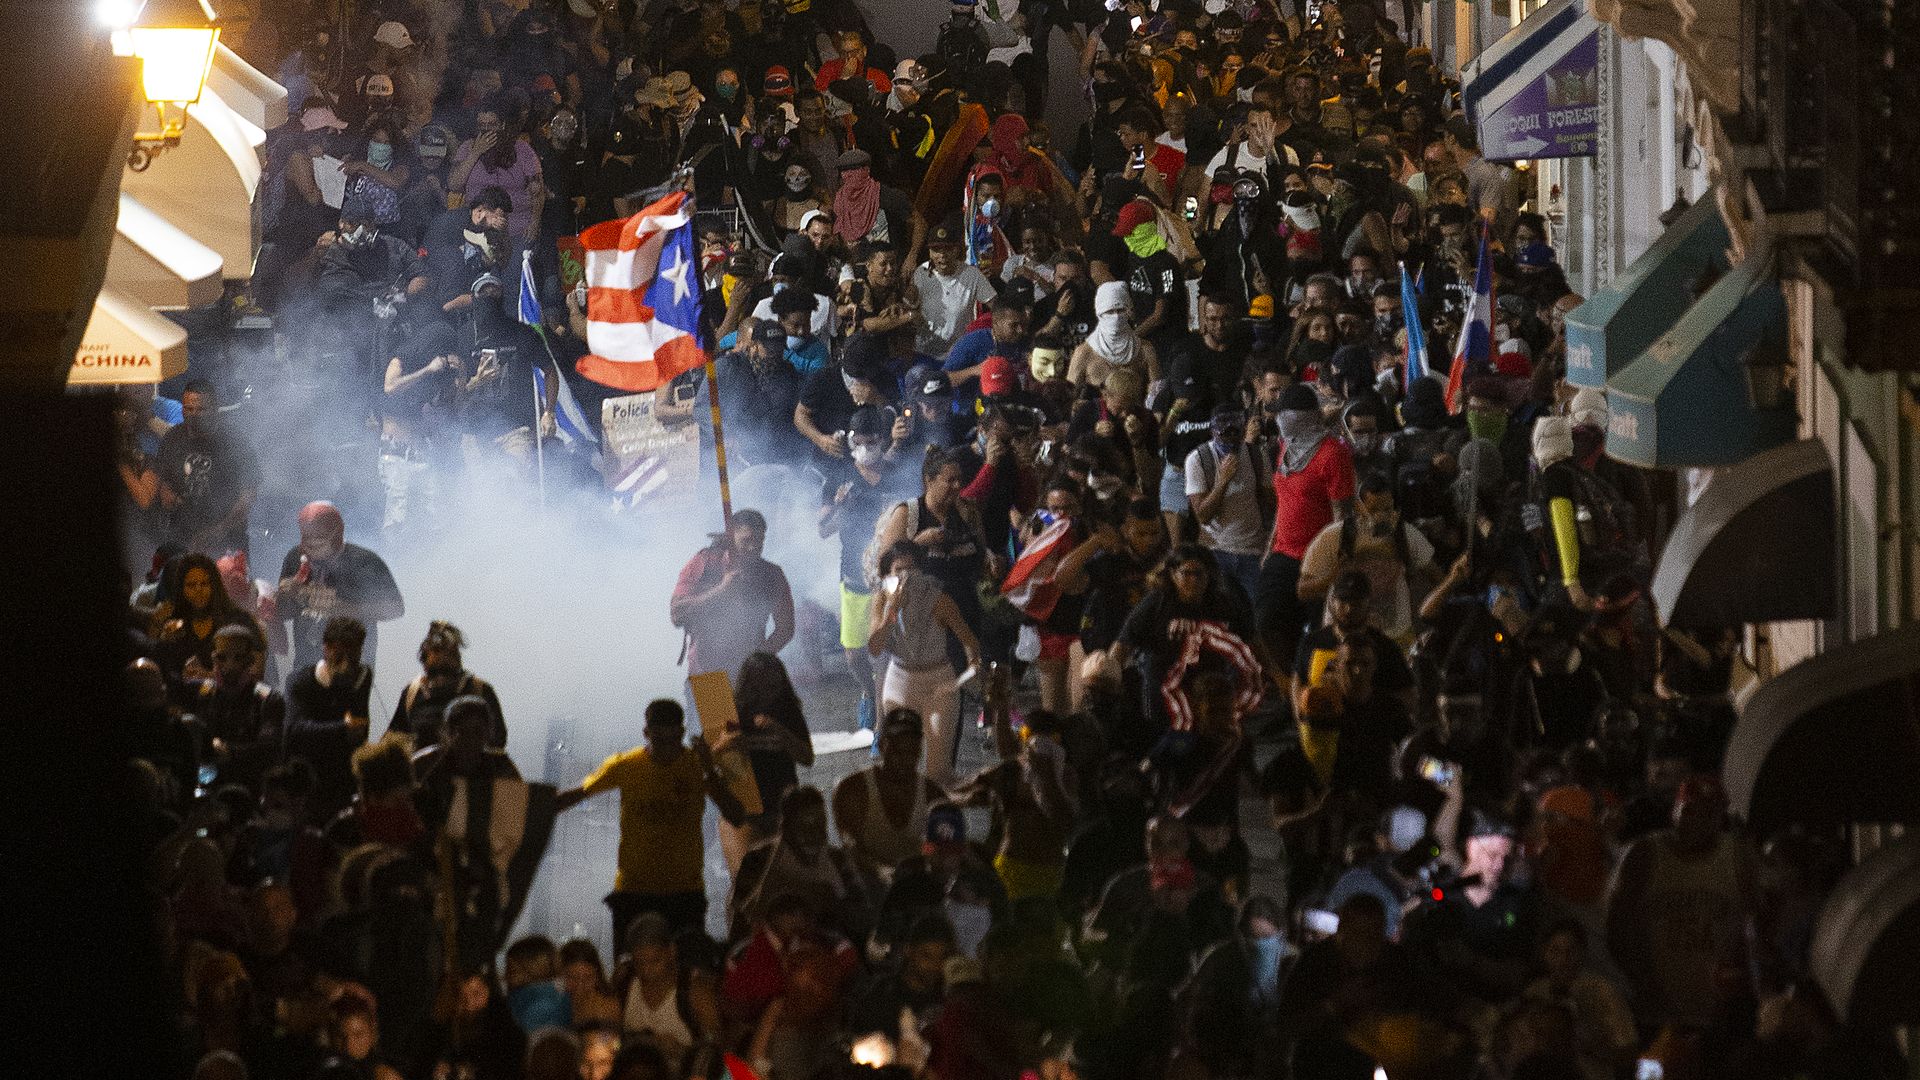 Police clash with protesters in front of the governor's mansion on July 23, 2019 in Old San Juan.